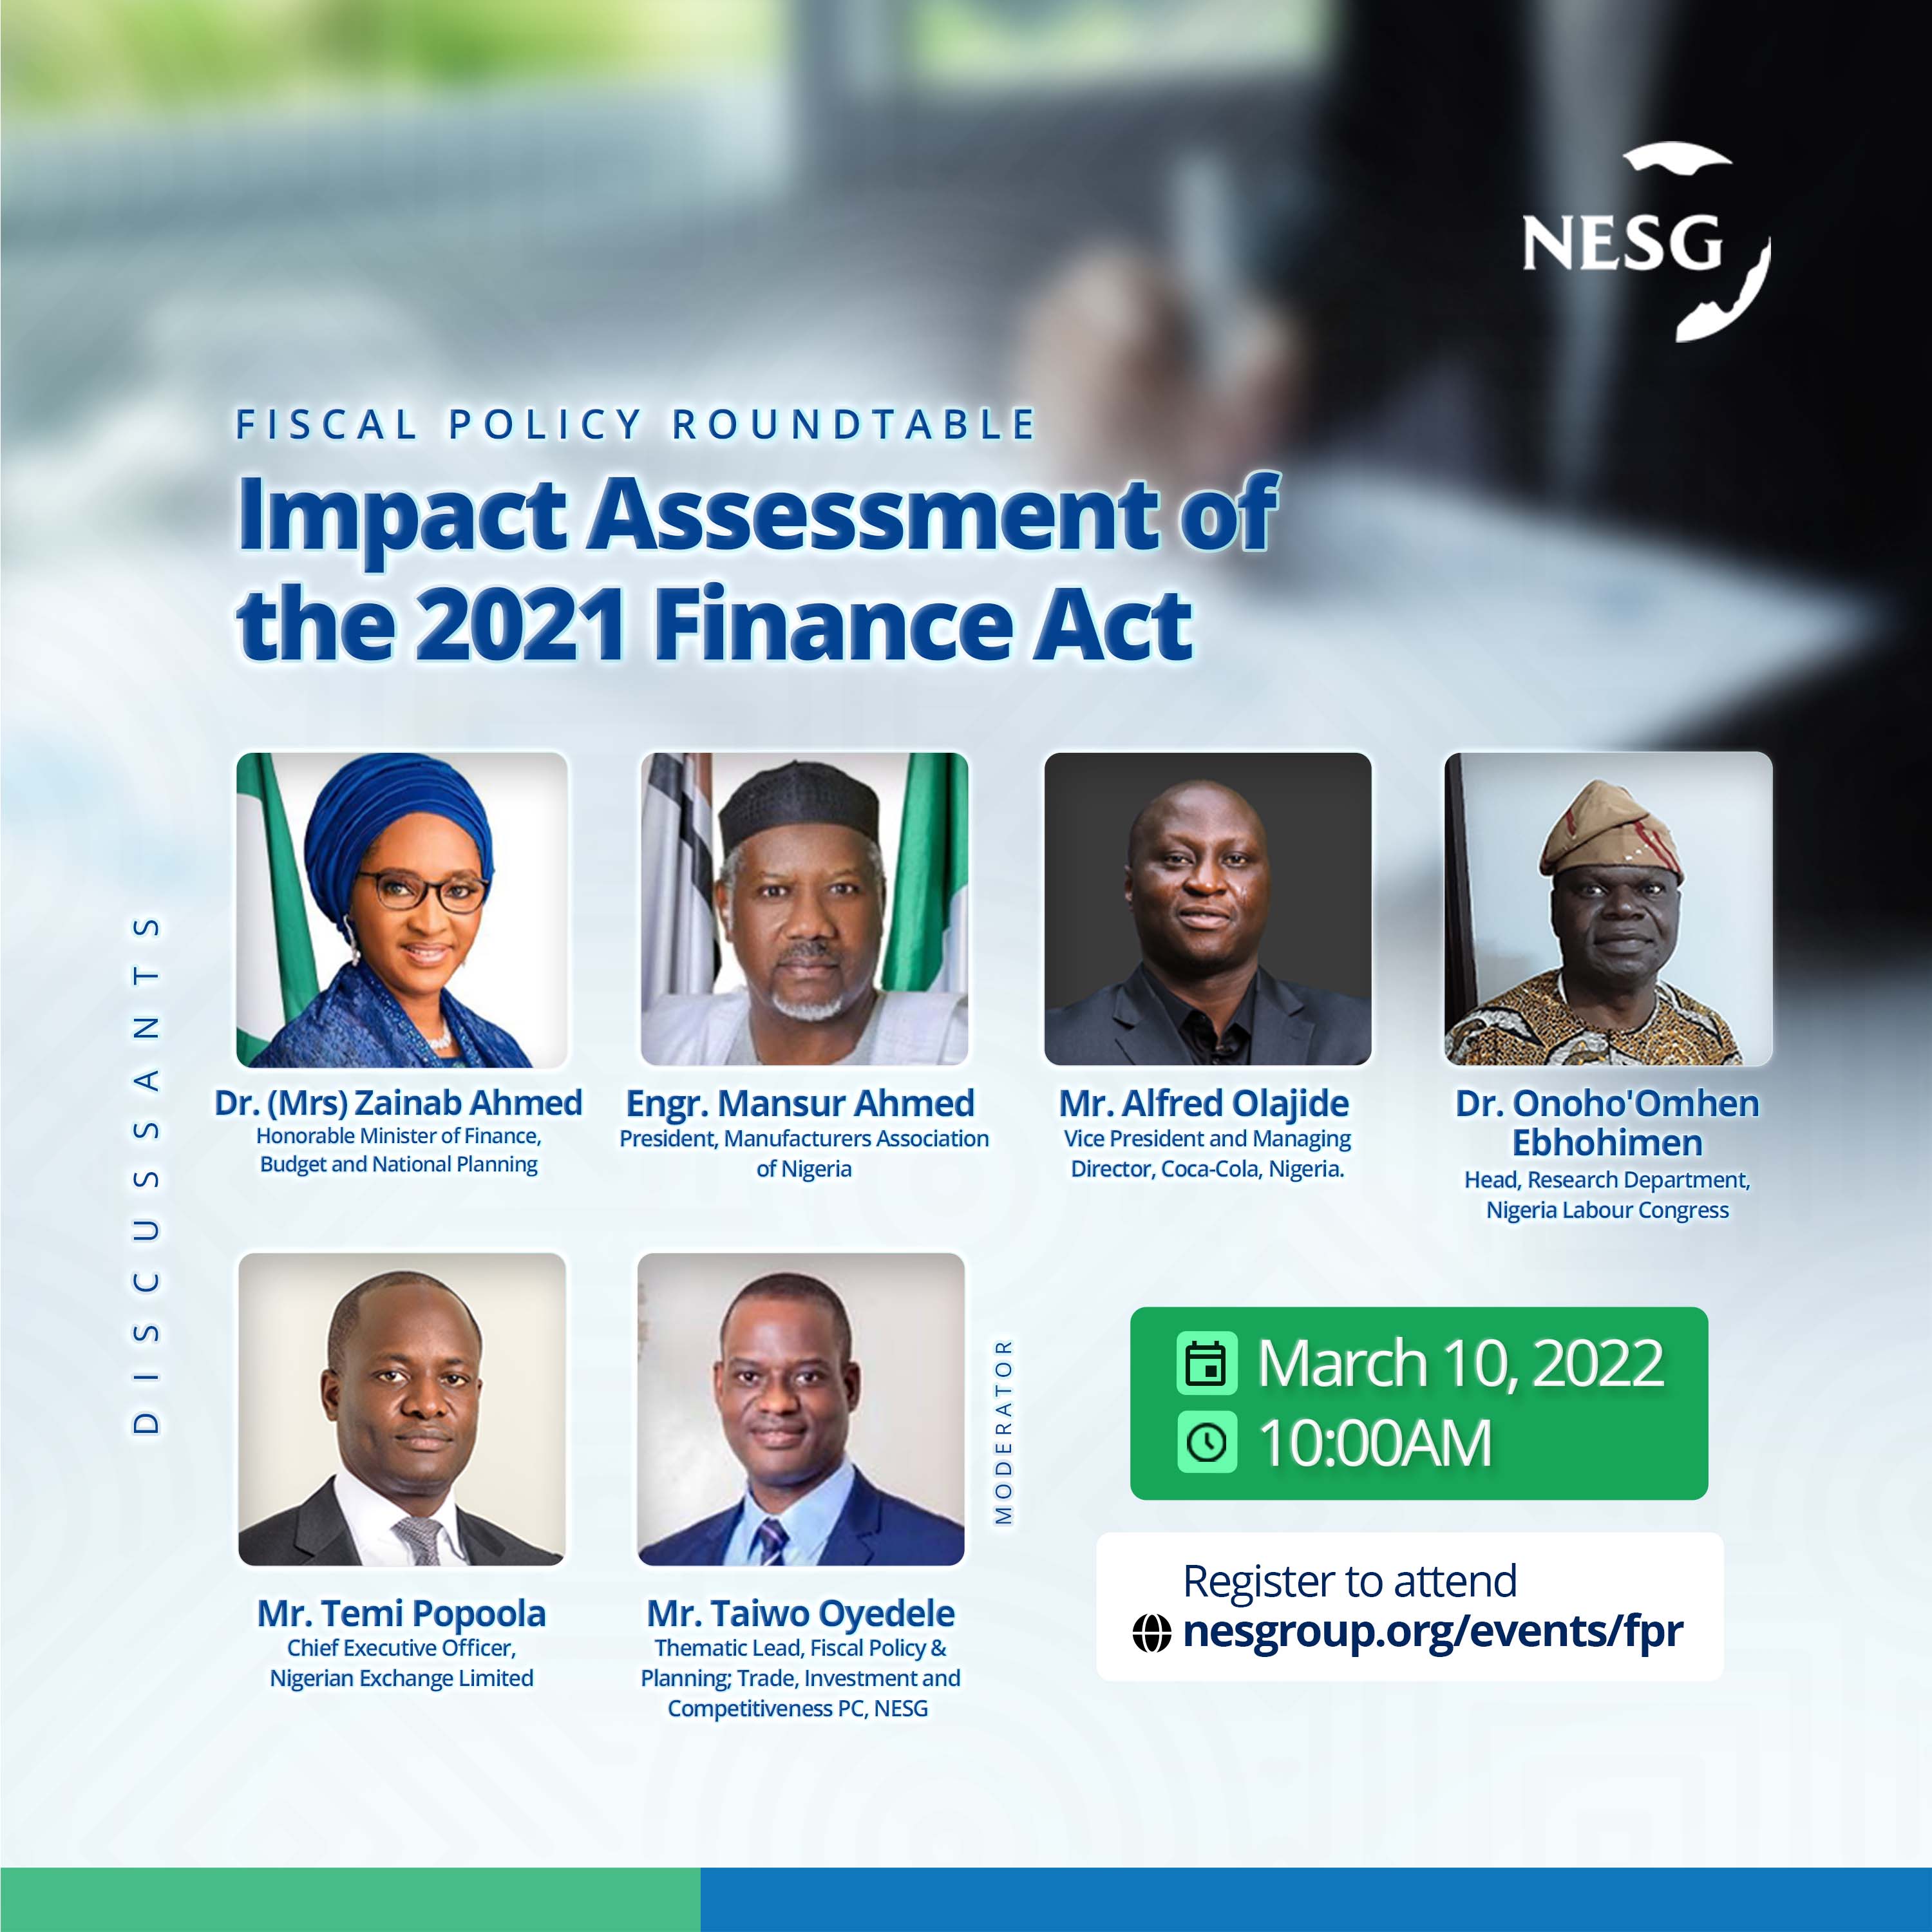 Impact Assessment of the 2021 Finance Act, The Nigerian Economic Summit Group, The NESG, think-tank, think, tank, nigeria, policy, nesg, africa, number one think in africa, best think in nigeria, the best think tank in africa, top 10 think tanks in nigeria, think tank nigeria, economy, business, PPD, public, private, dialogue, Nigeria, Nigeria PPD, NIGERIA, PPD